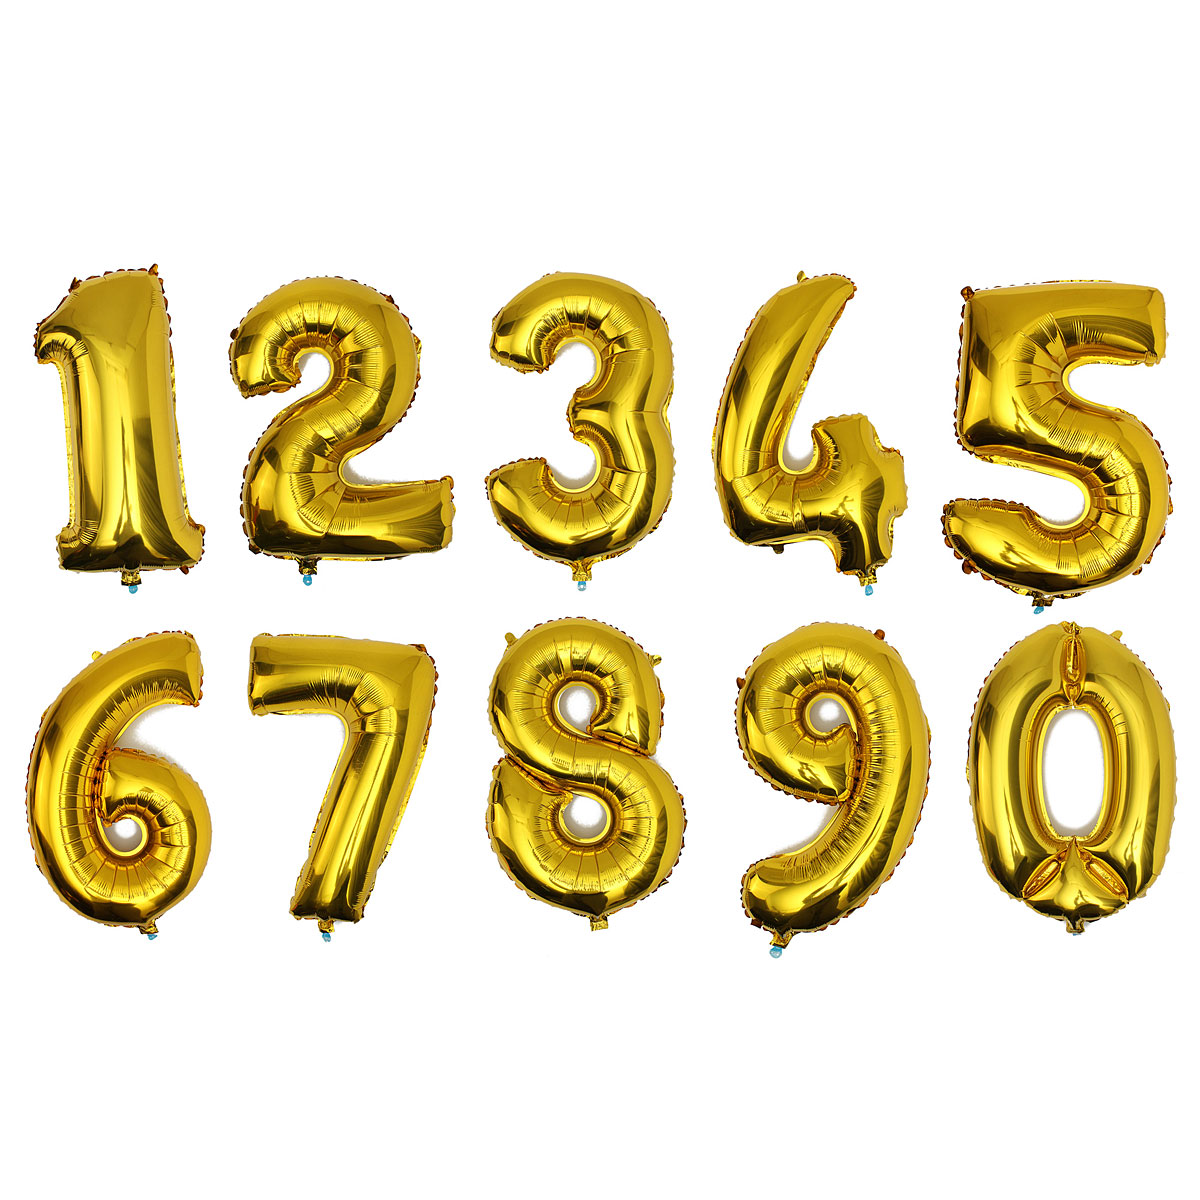 Gold-Silver-Number-Foil-Balloon-Wedding-Birthday-Party-Decoration-971829-1